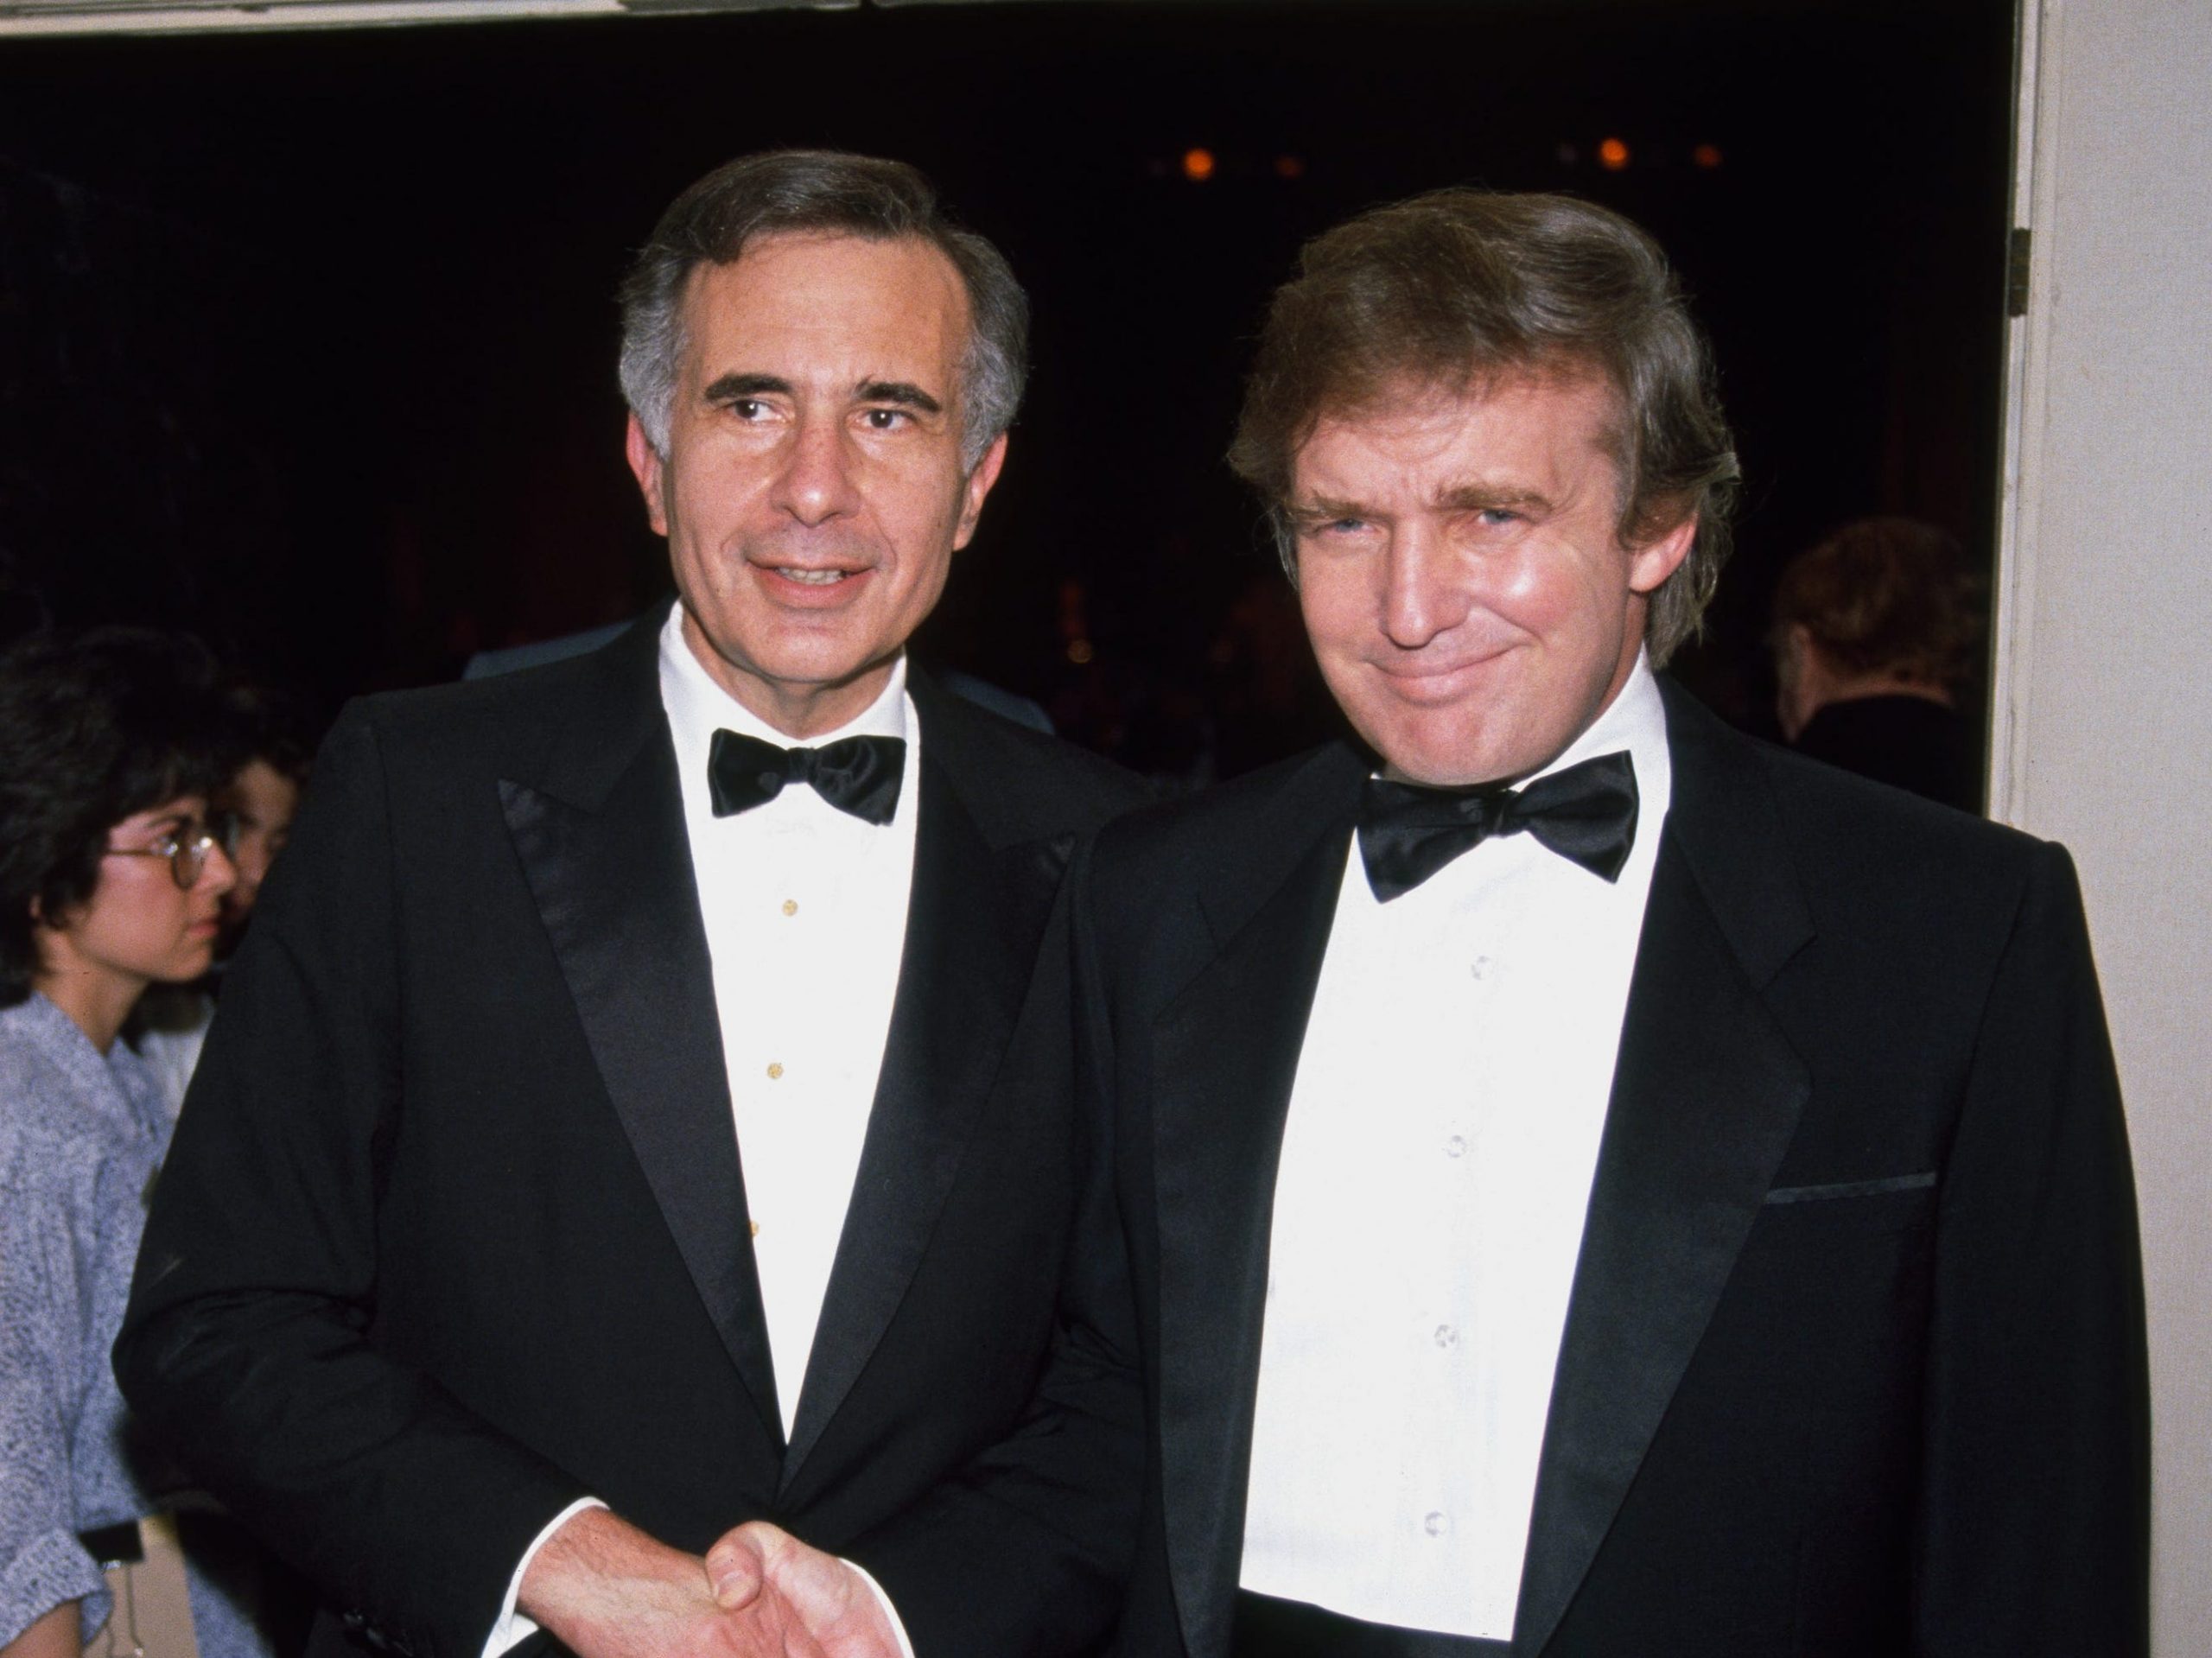 Carl Icahn and Donald Trump in 1990